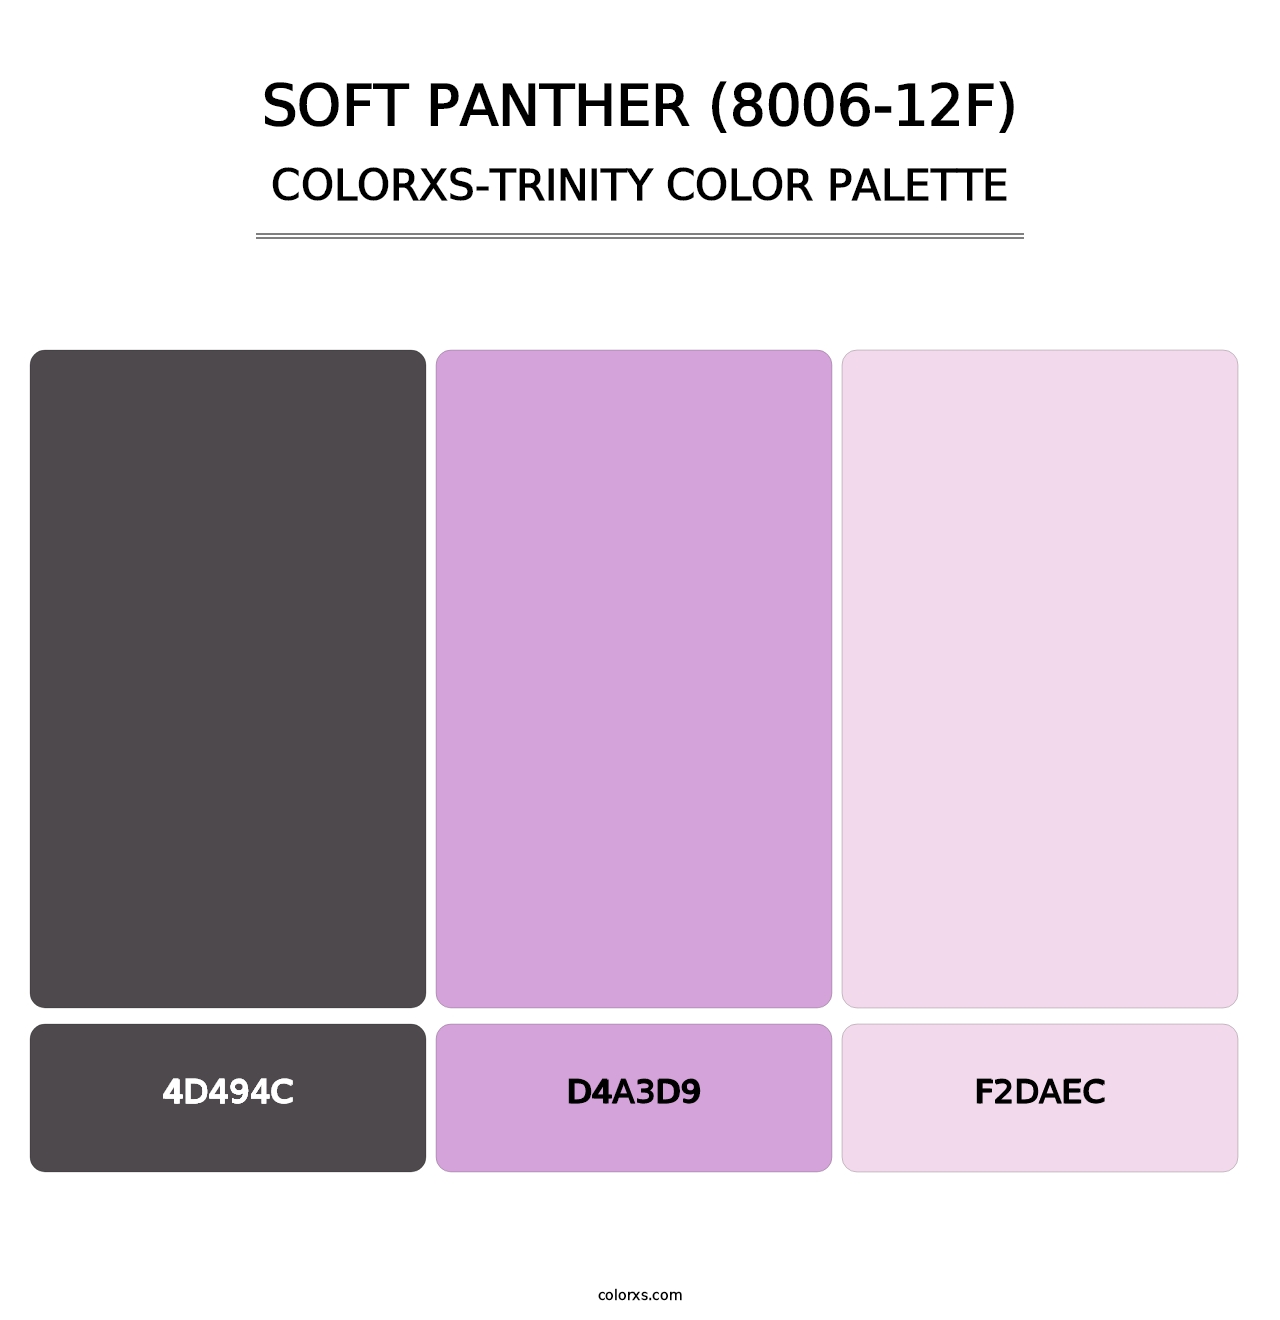 Soft Panther (8006-12F) - Colorxs Trinity Palette